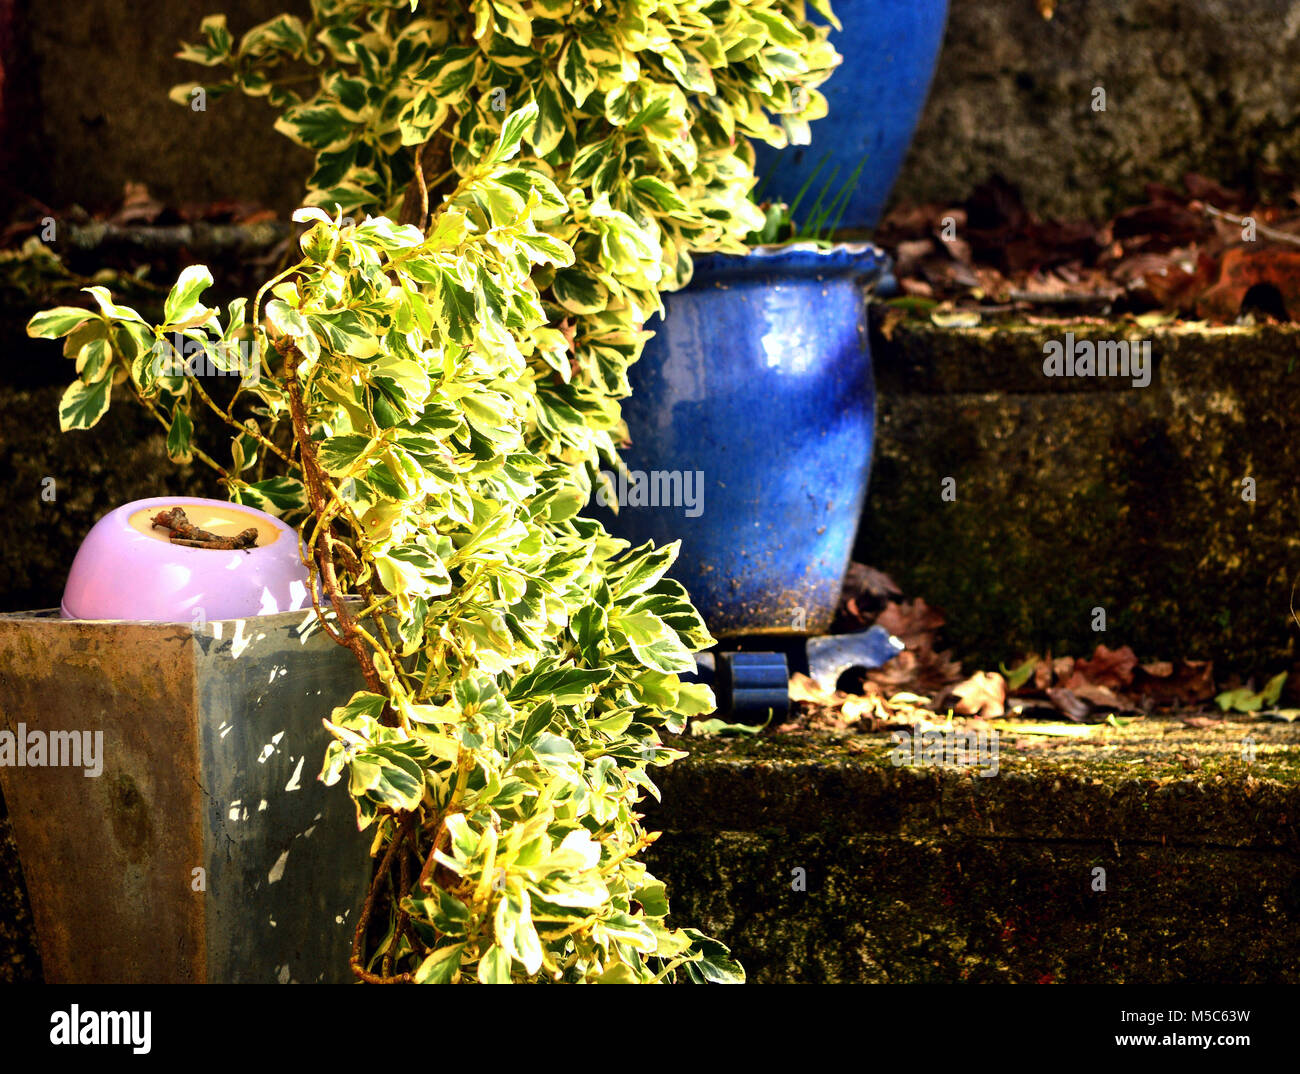 Garden plants in pots isolating them from weeds and other invasive plants Stock Photo